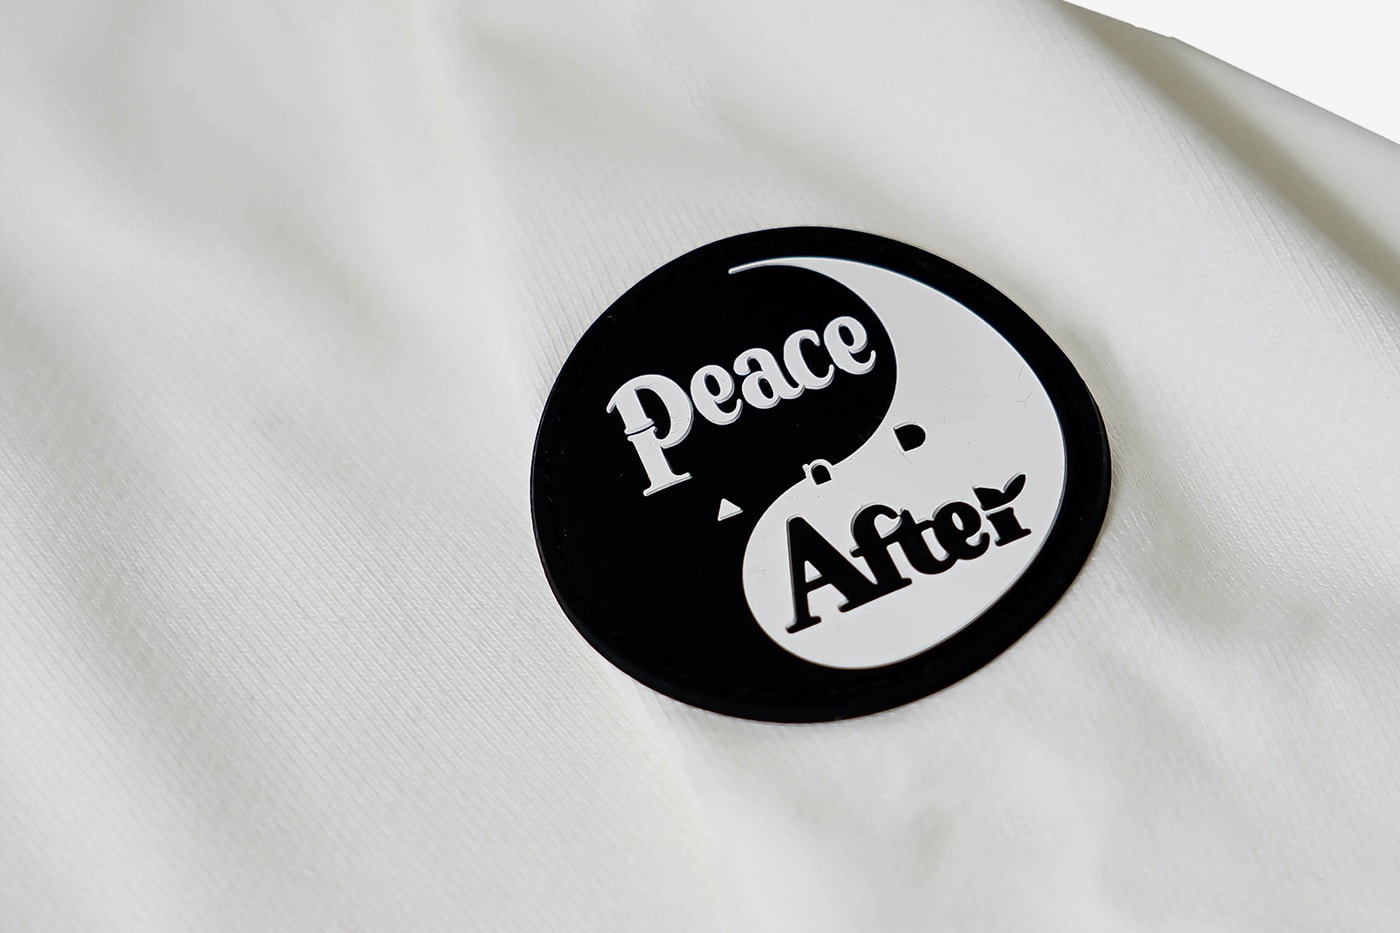 Kosuke Kawamura PEACE AND AFTER Capsule Collection Release Info Buy Price Black White